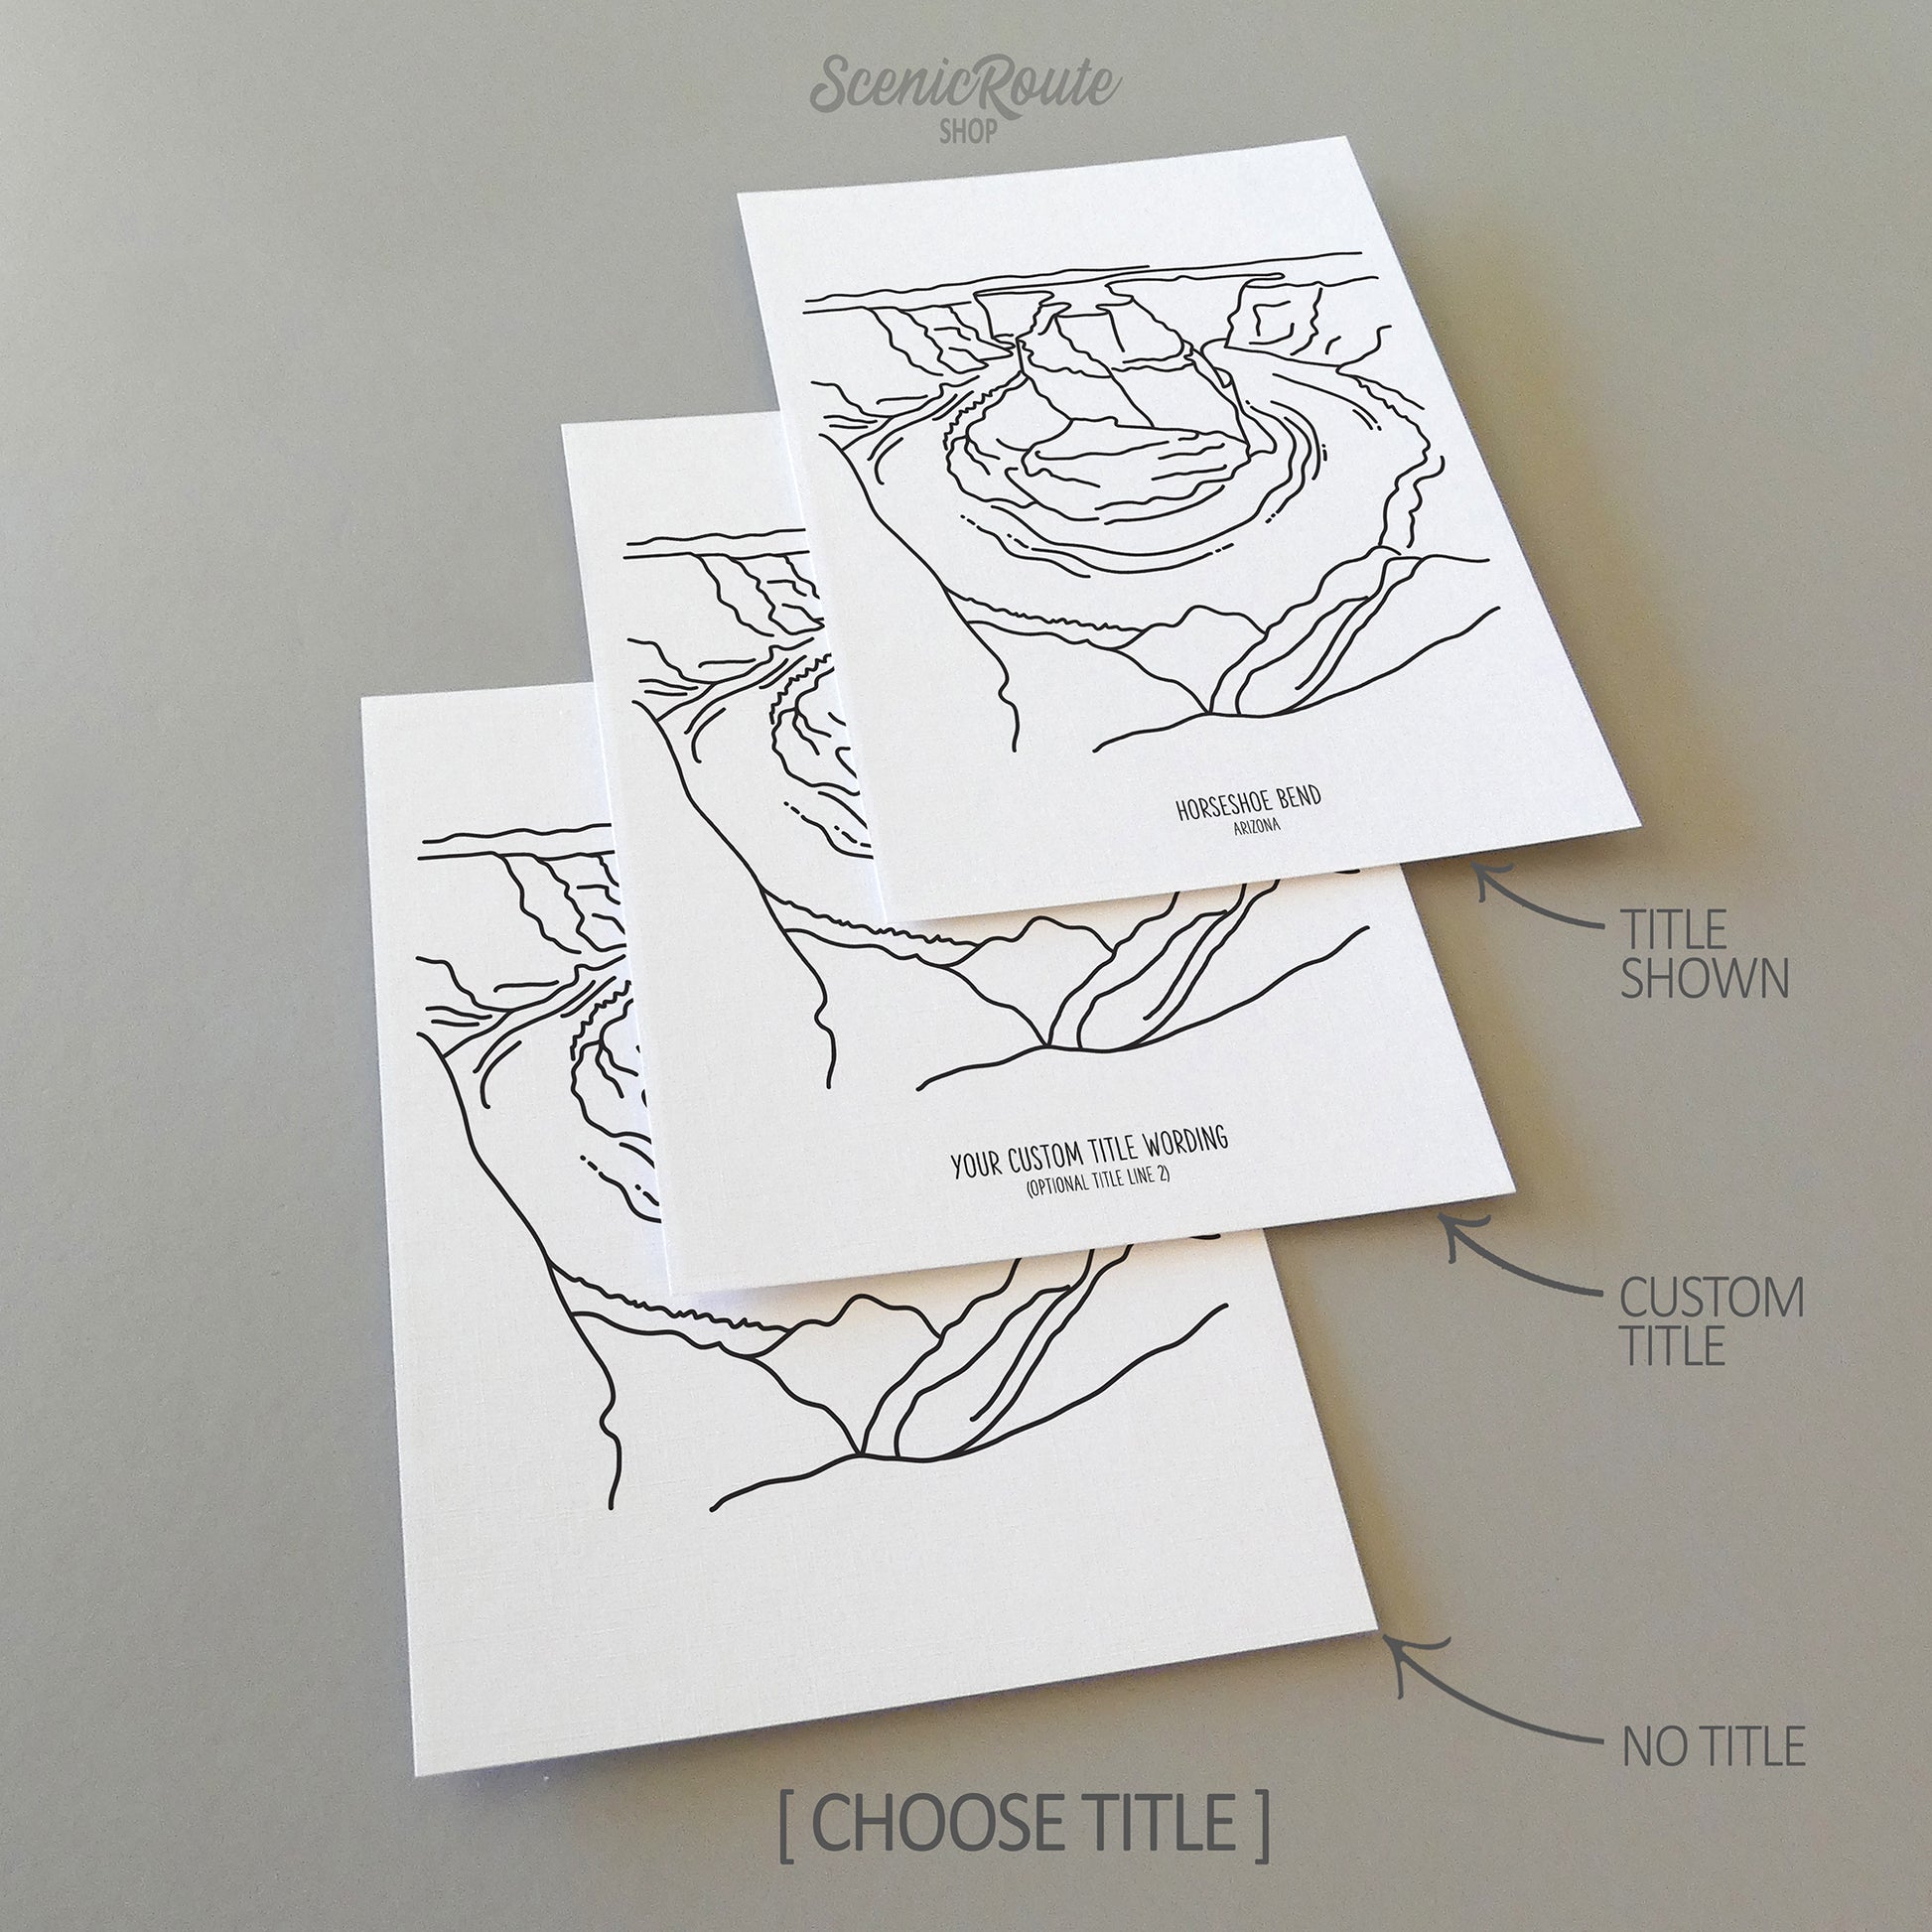 Three line art drawings of Horseshoe Bend Park on white linen paper with a gray background. The pieces are shown with title options that can be chosen and personalized.